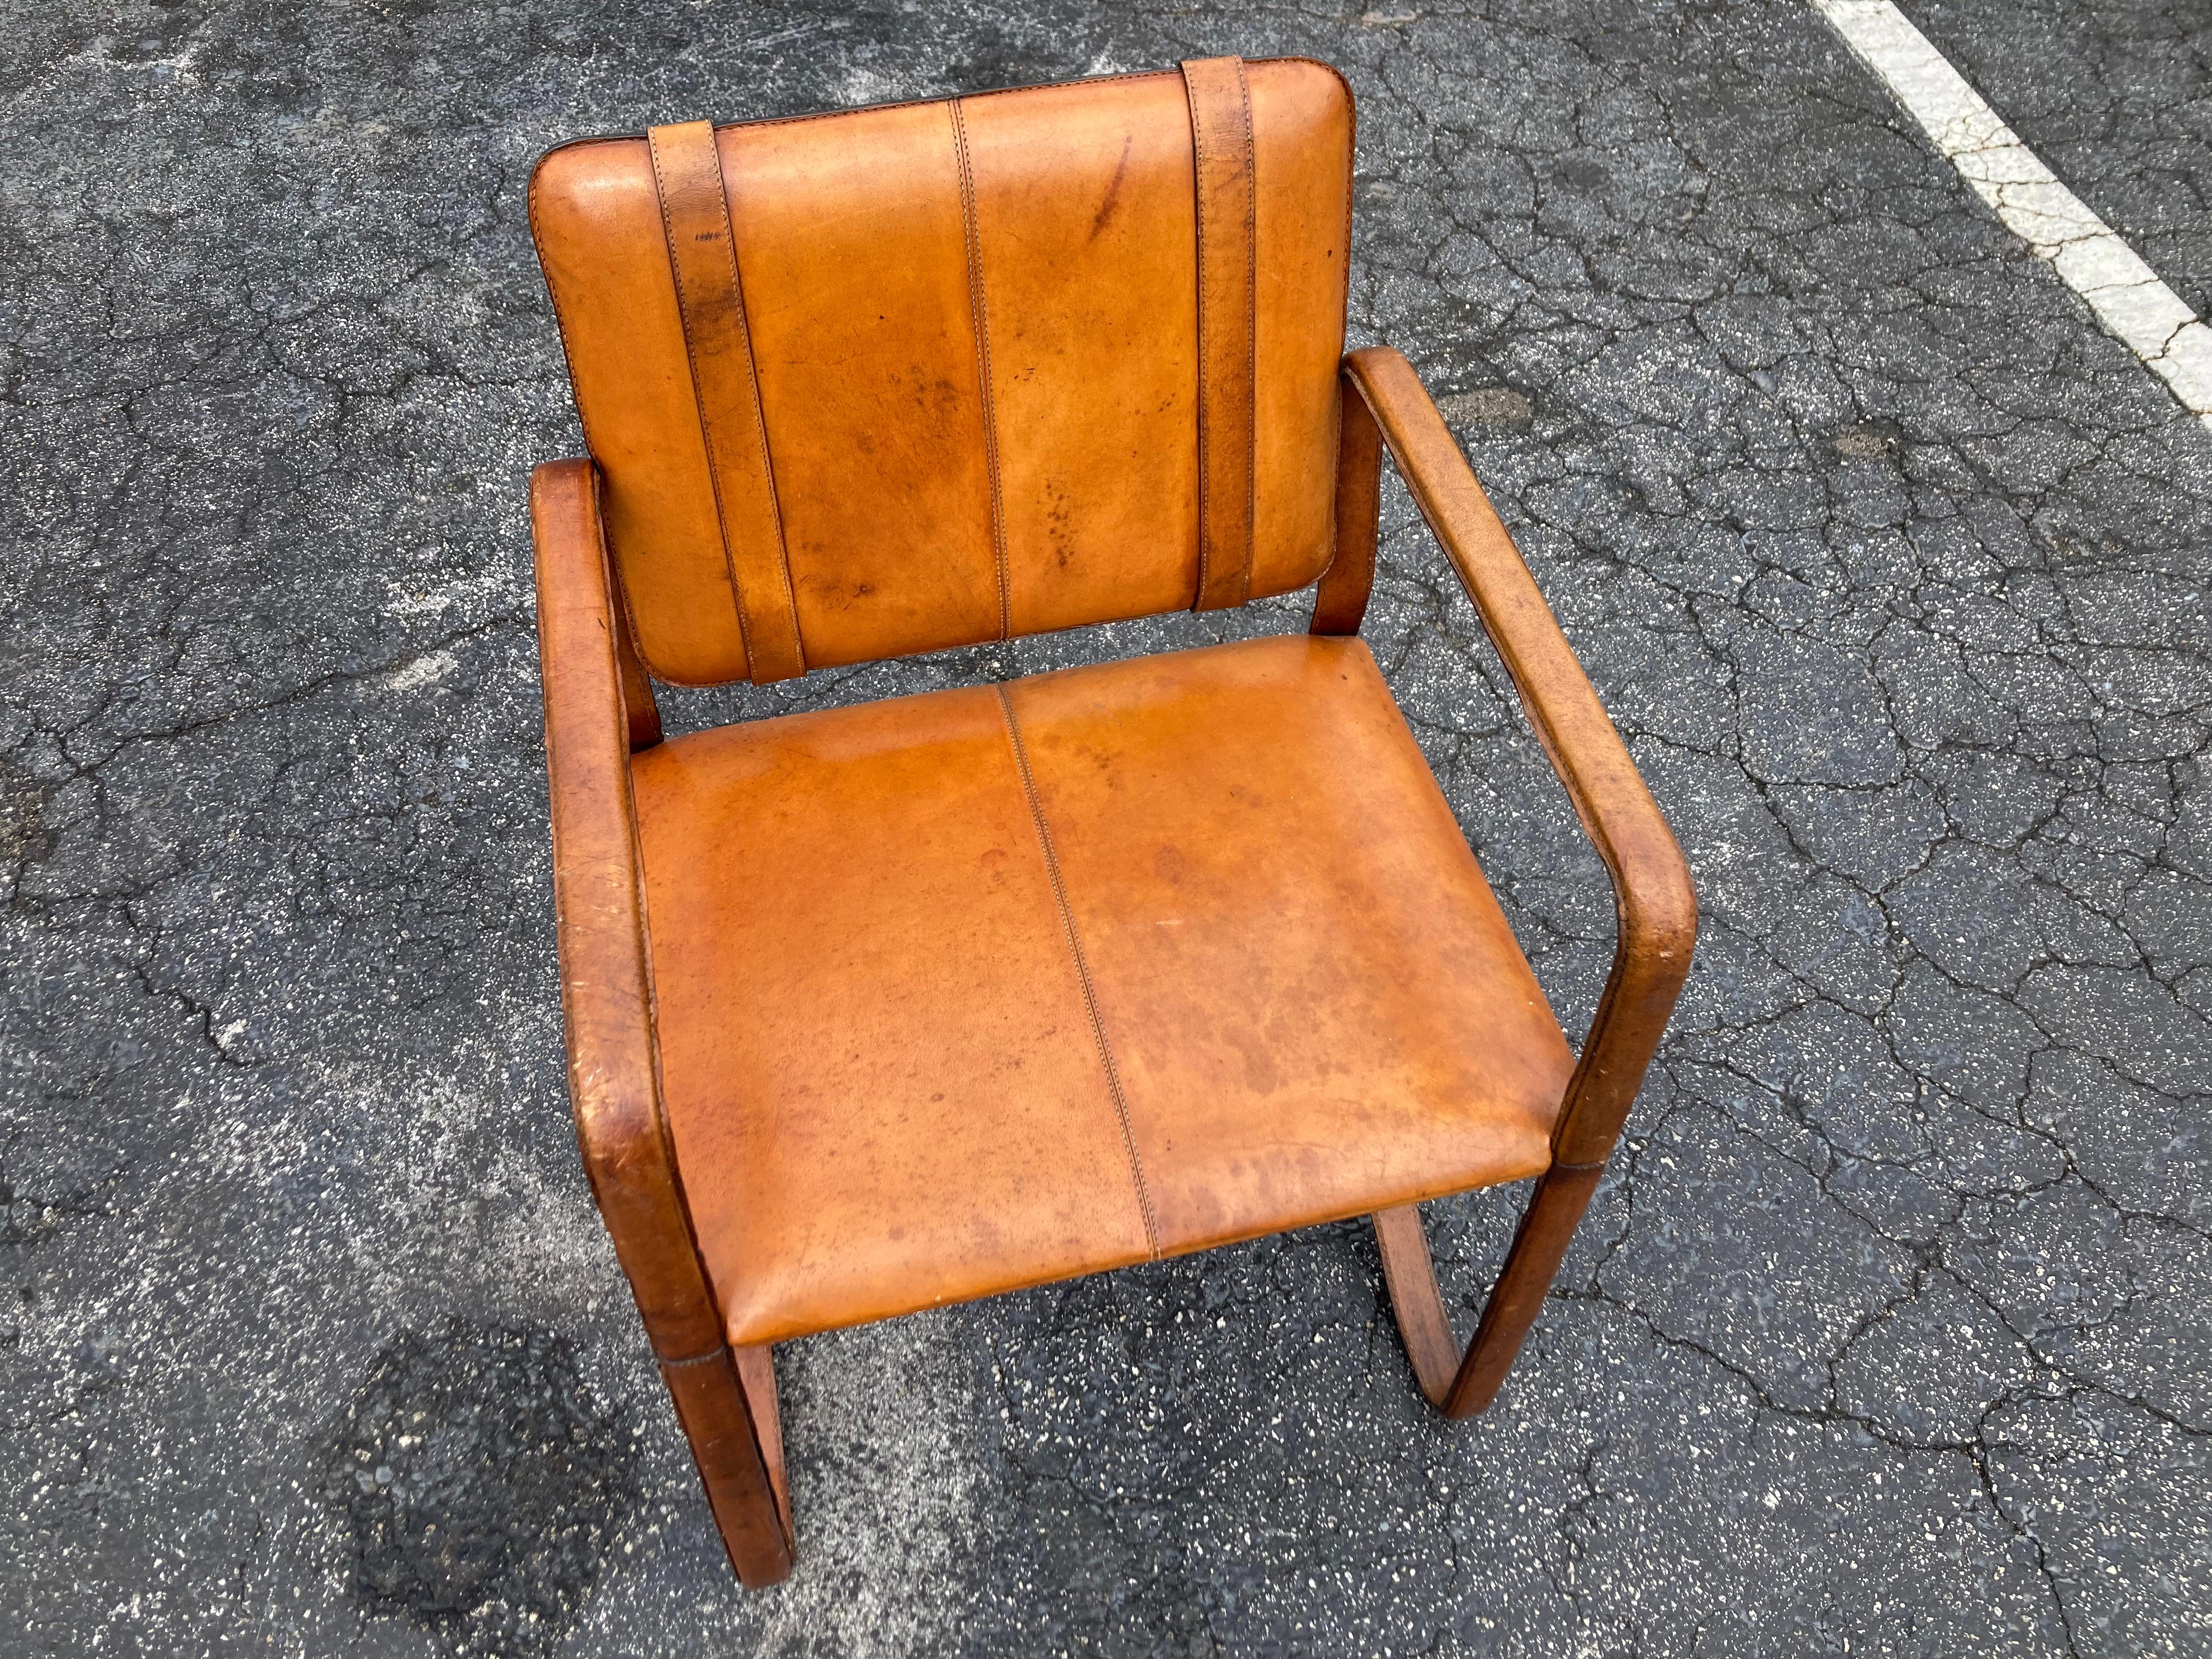 Pair of Cognac Leather Wrapped Arm Chairs in the style of Jacques Adnet 1